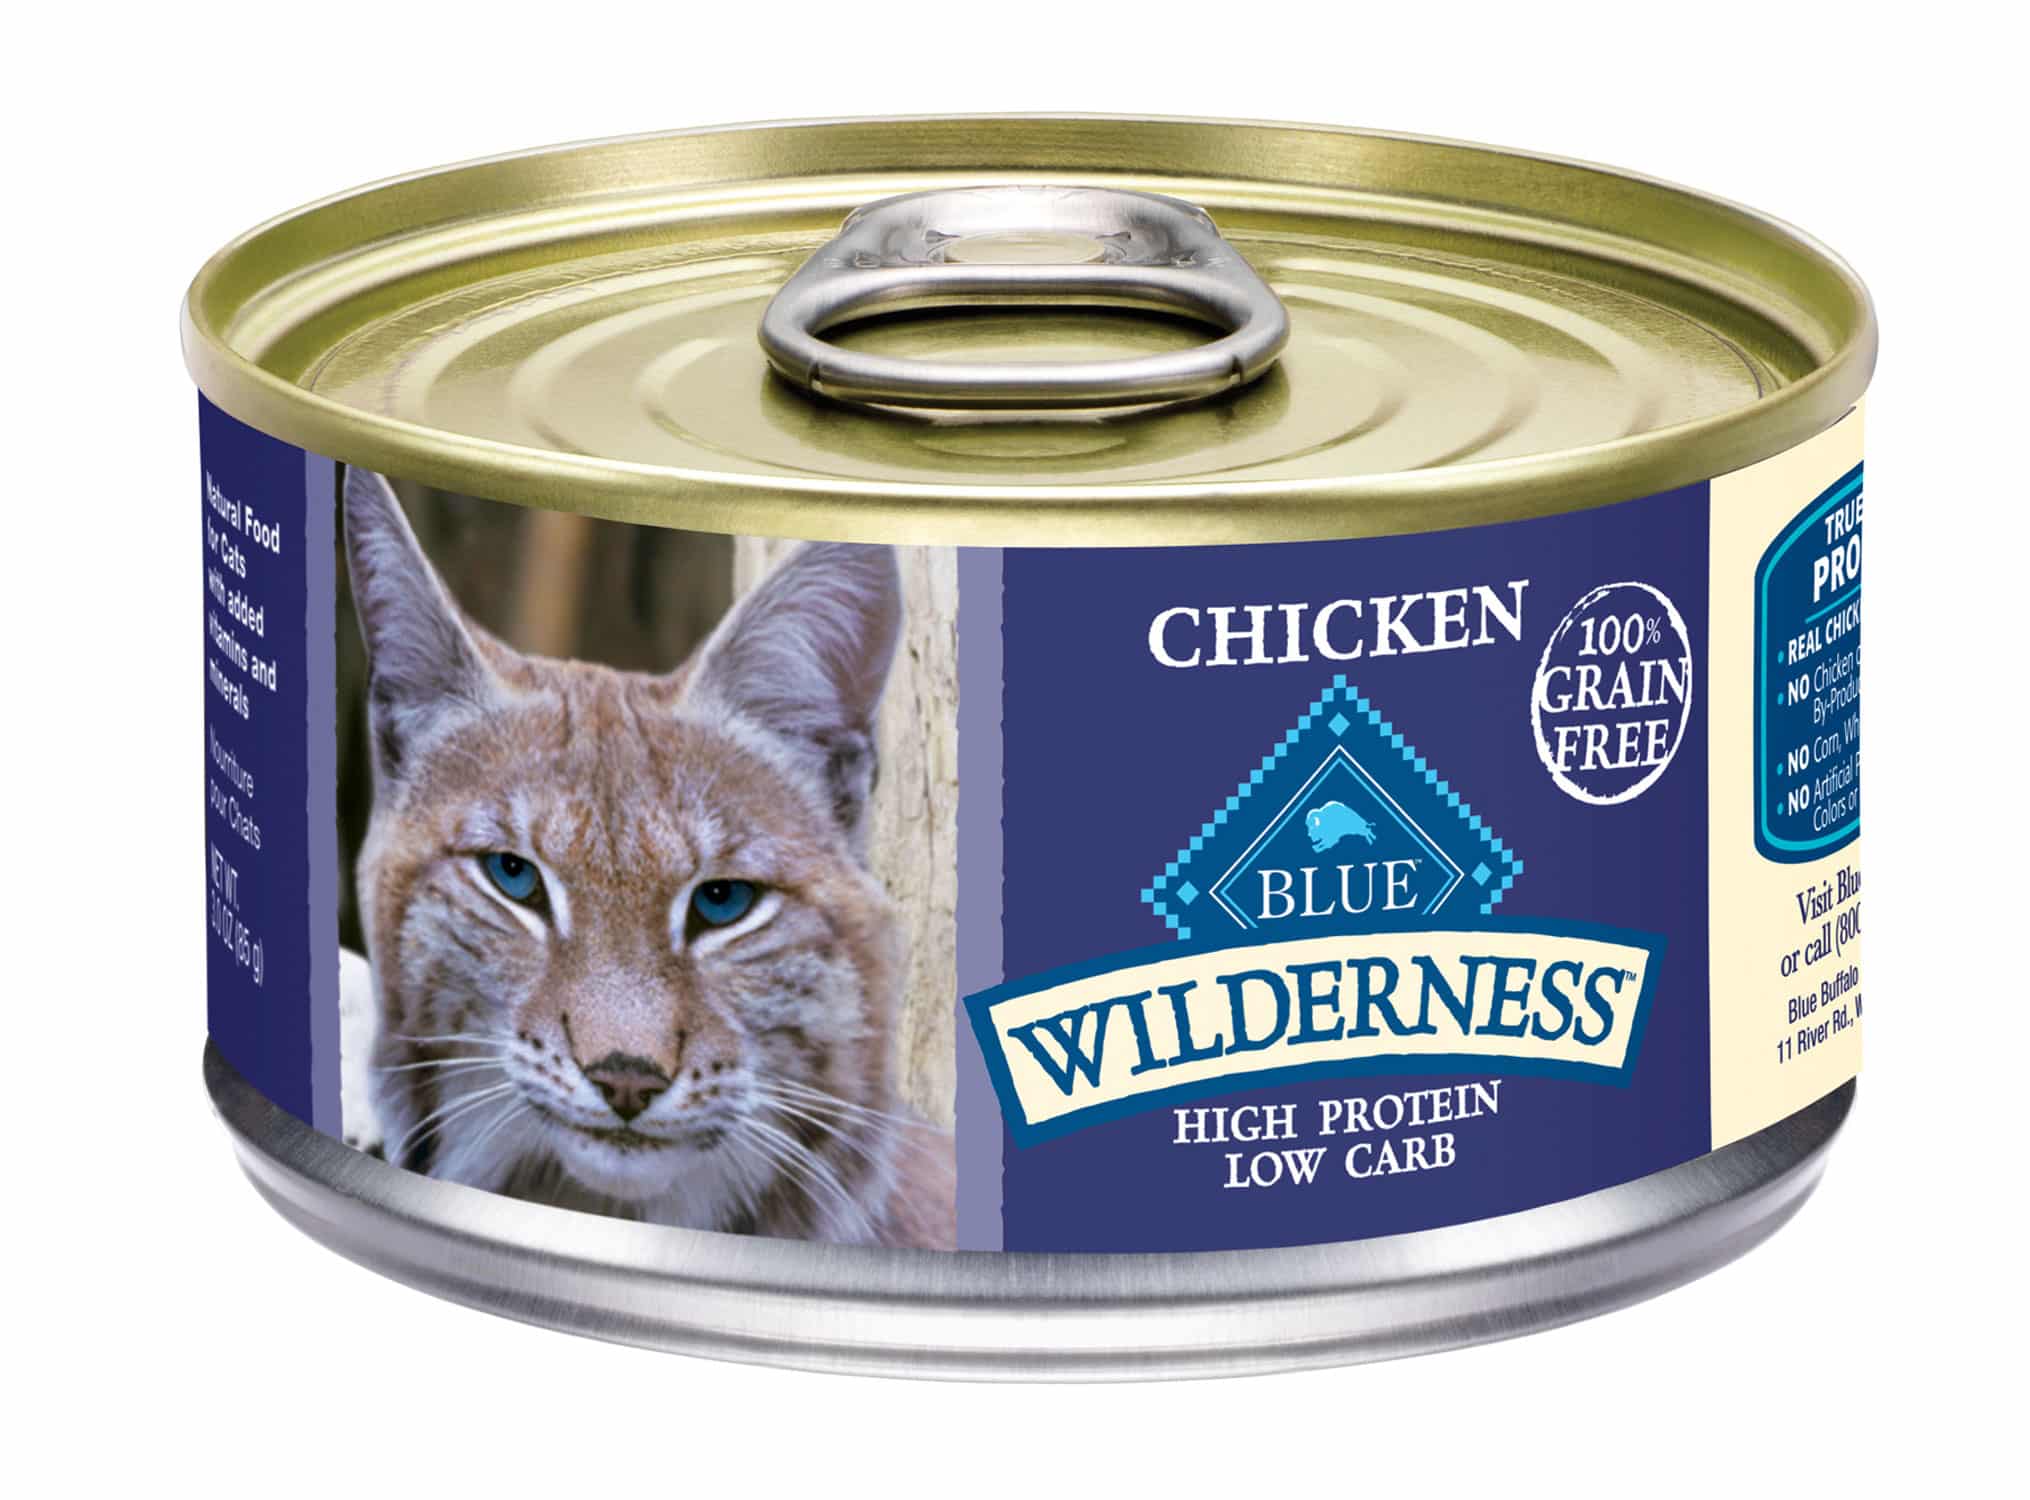 Protein Foods: High Protein Canned Cat Food